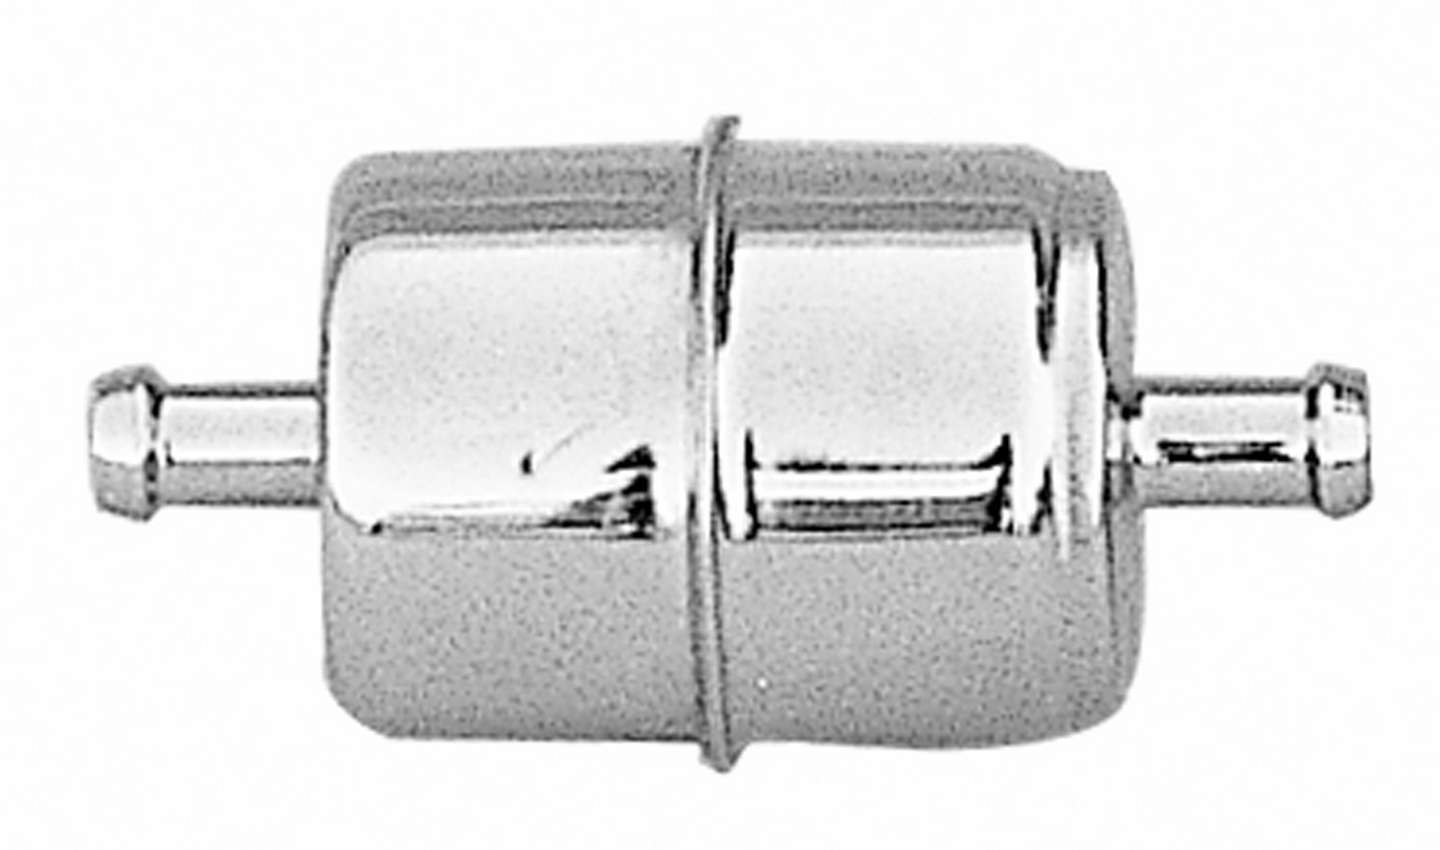 Trans Dapt 9177 Fuel Filter, In-Line, Paper Element, 3/8 in Hose Barb Inlet, 3/8 in Hose Barb Outlet, Disposable, Steel, Chrome, Each